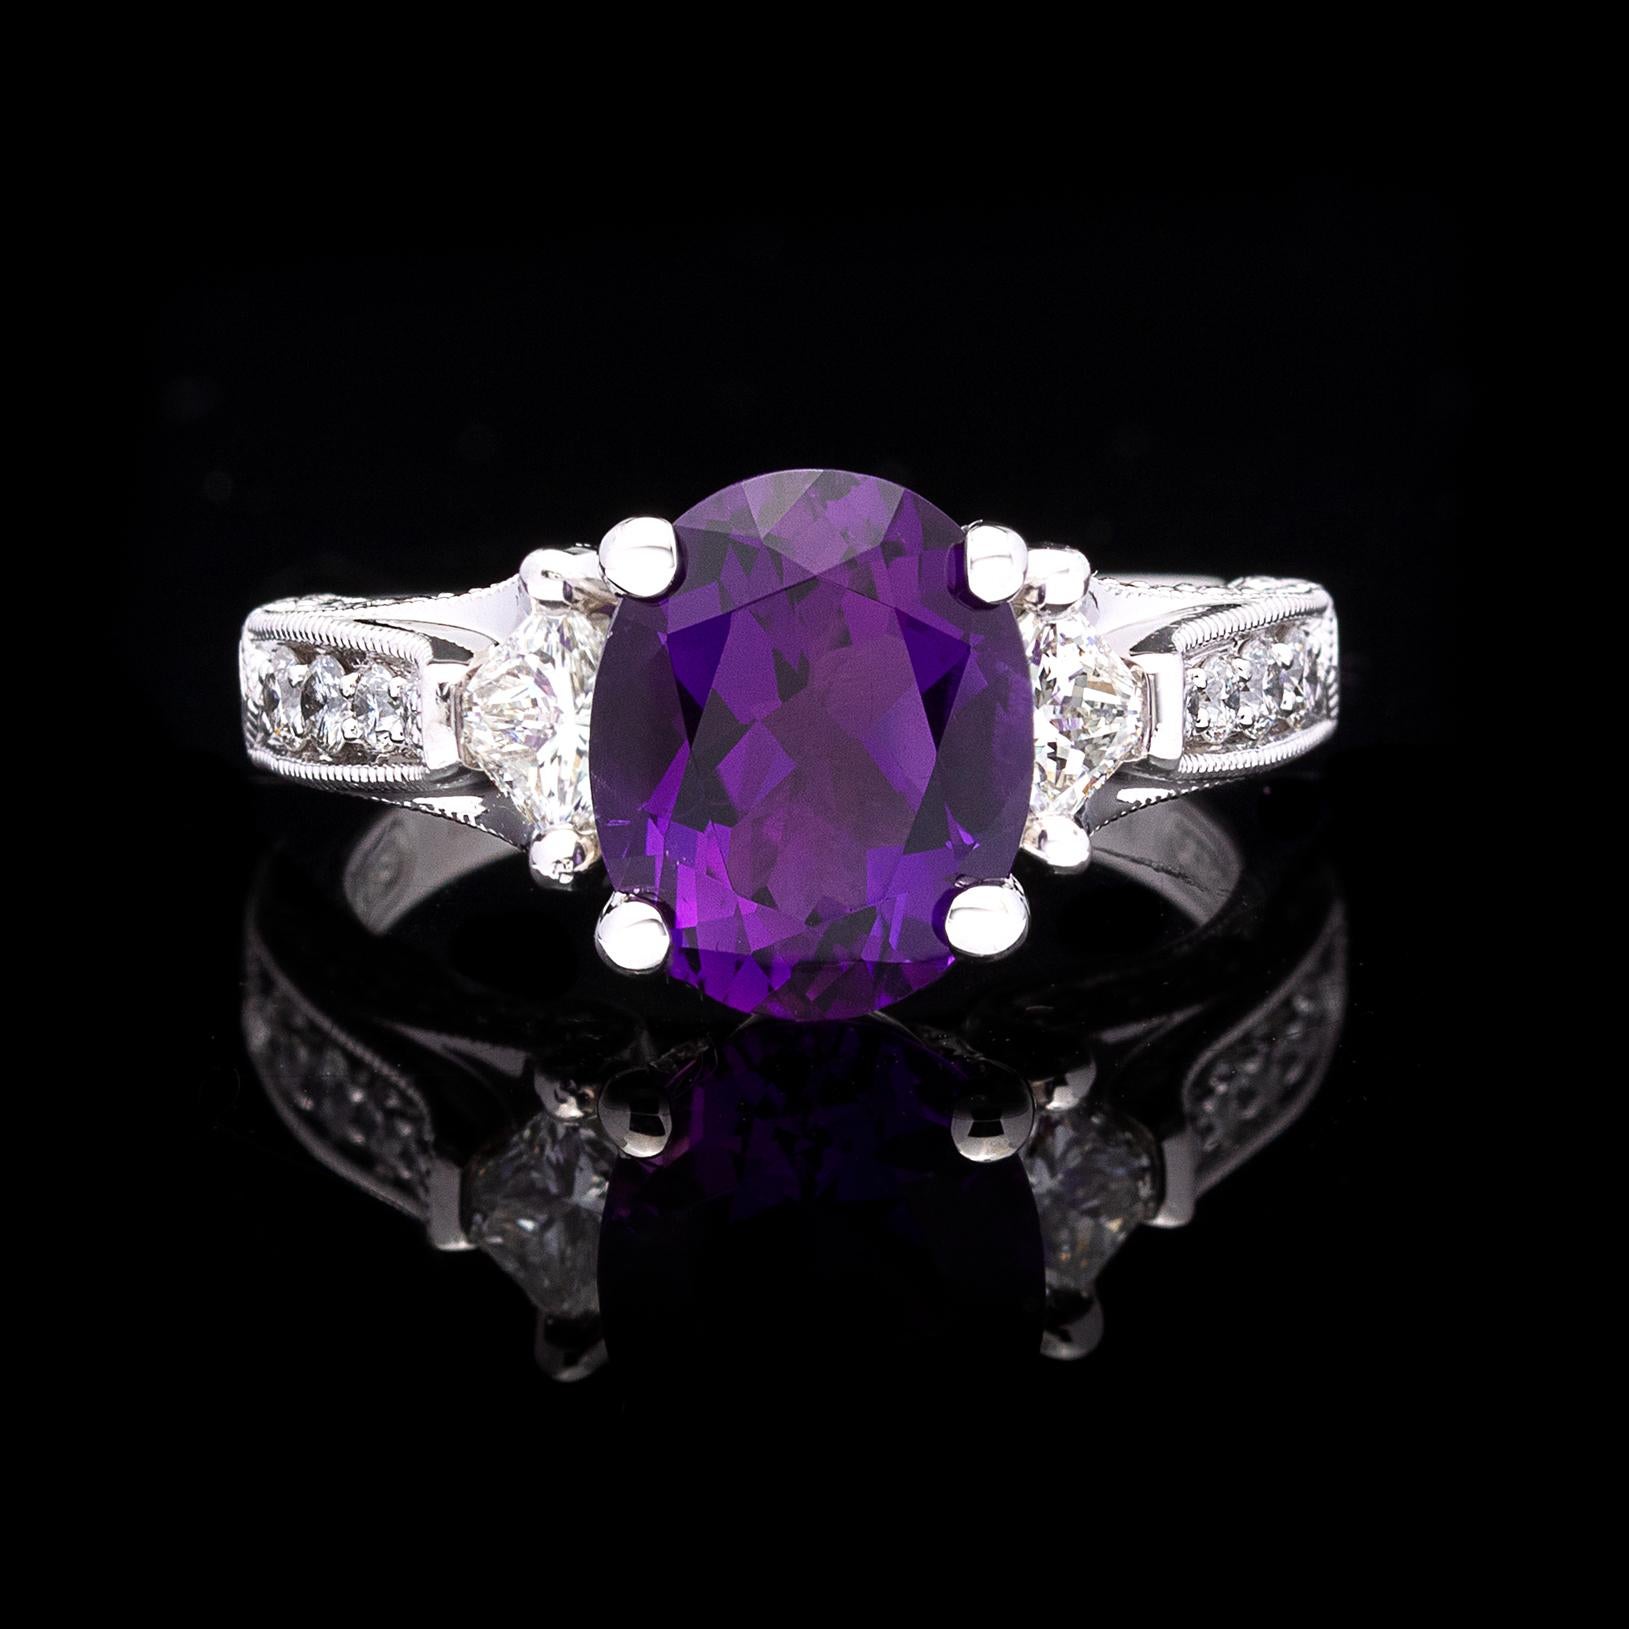 Deep lustrous purple is the color of Royalty. This platinum ring features a 2.43-carats oval-cut purple amethyst with subtle hints of pink, accented with two princess and 32 round brilliant-cut diamonds for a total of 0.73-carat. The ring weighs 9.5